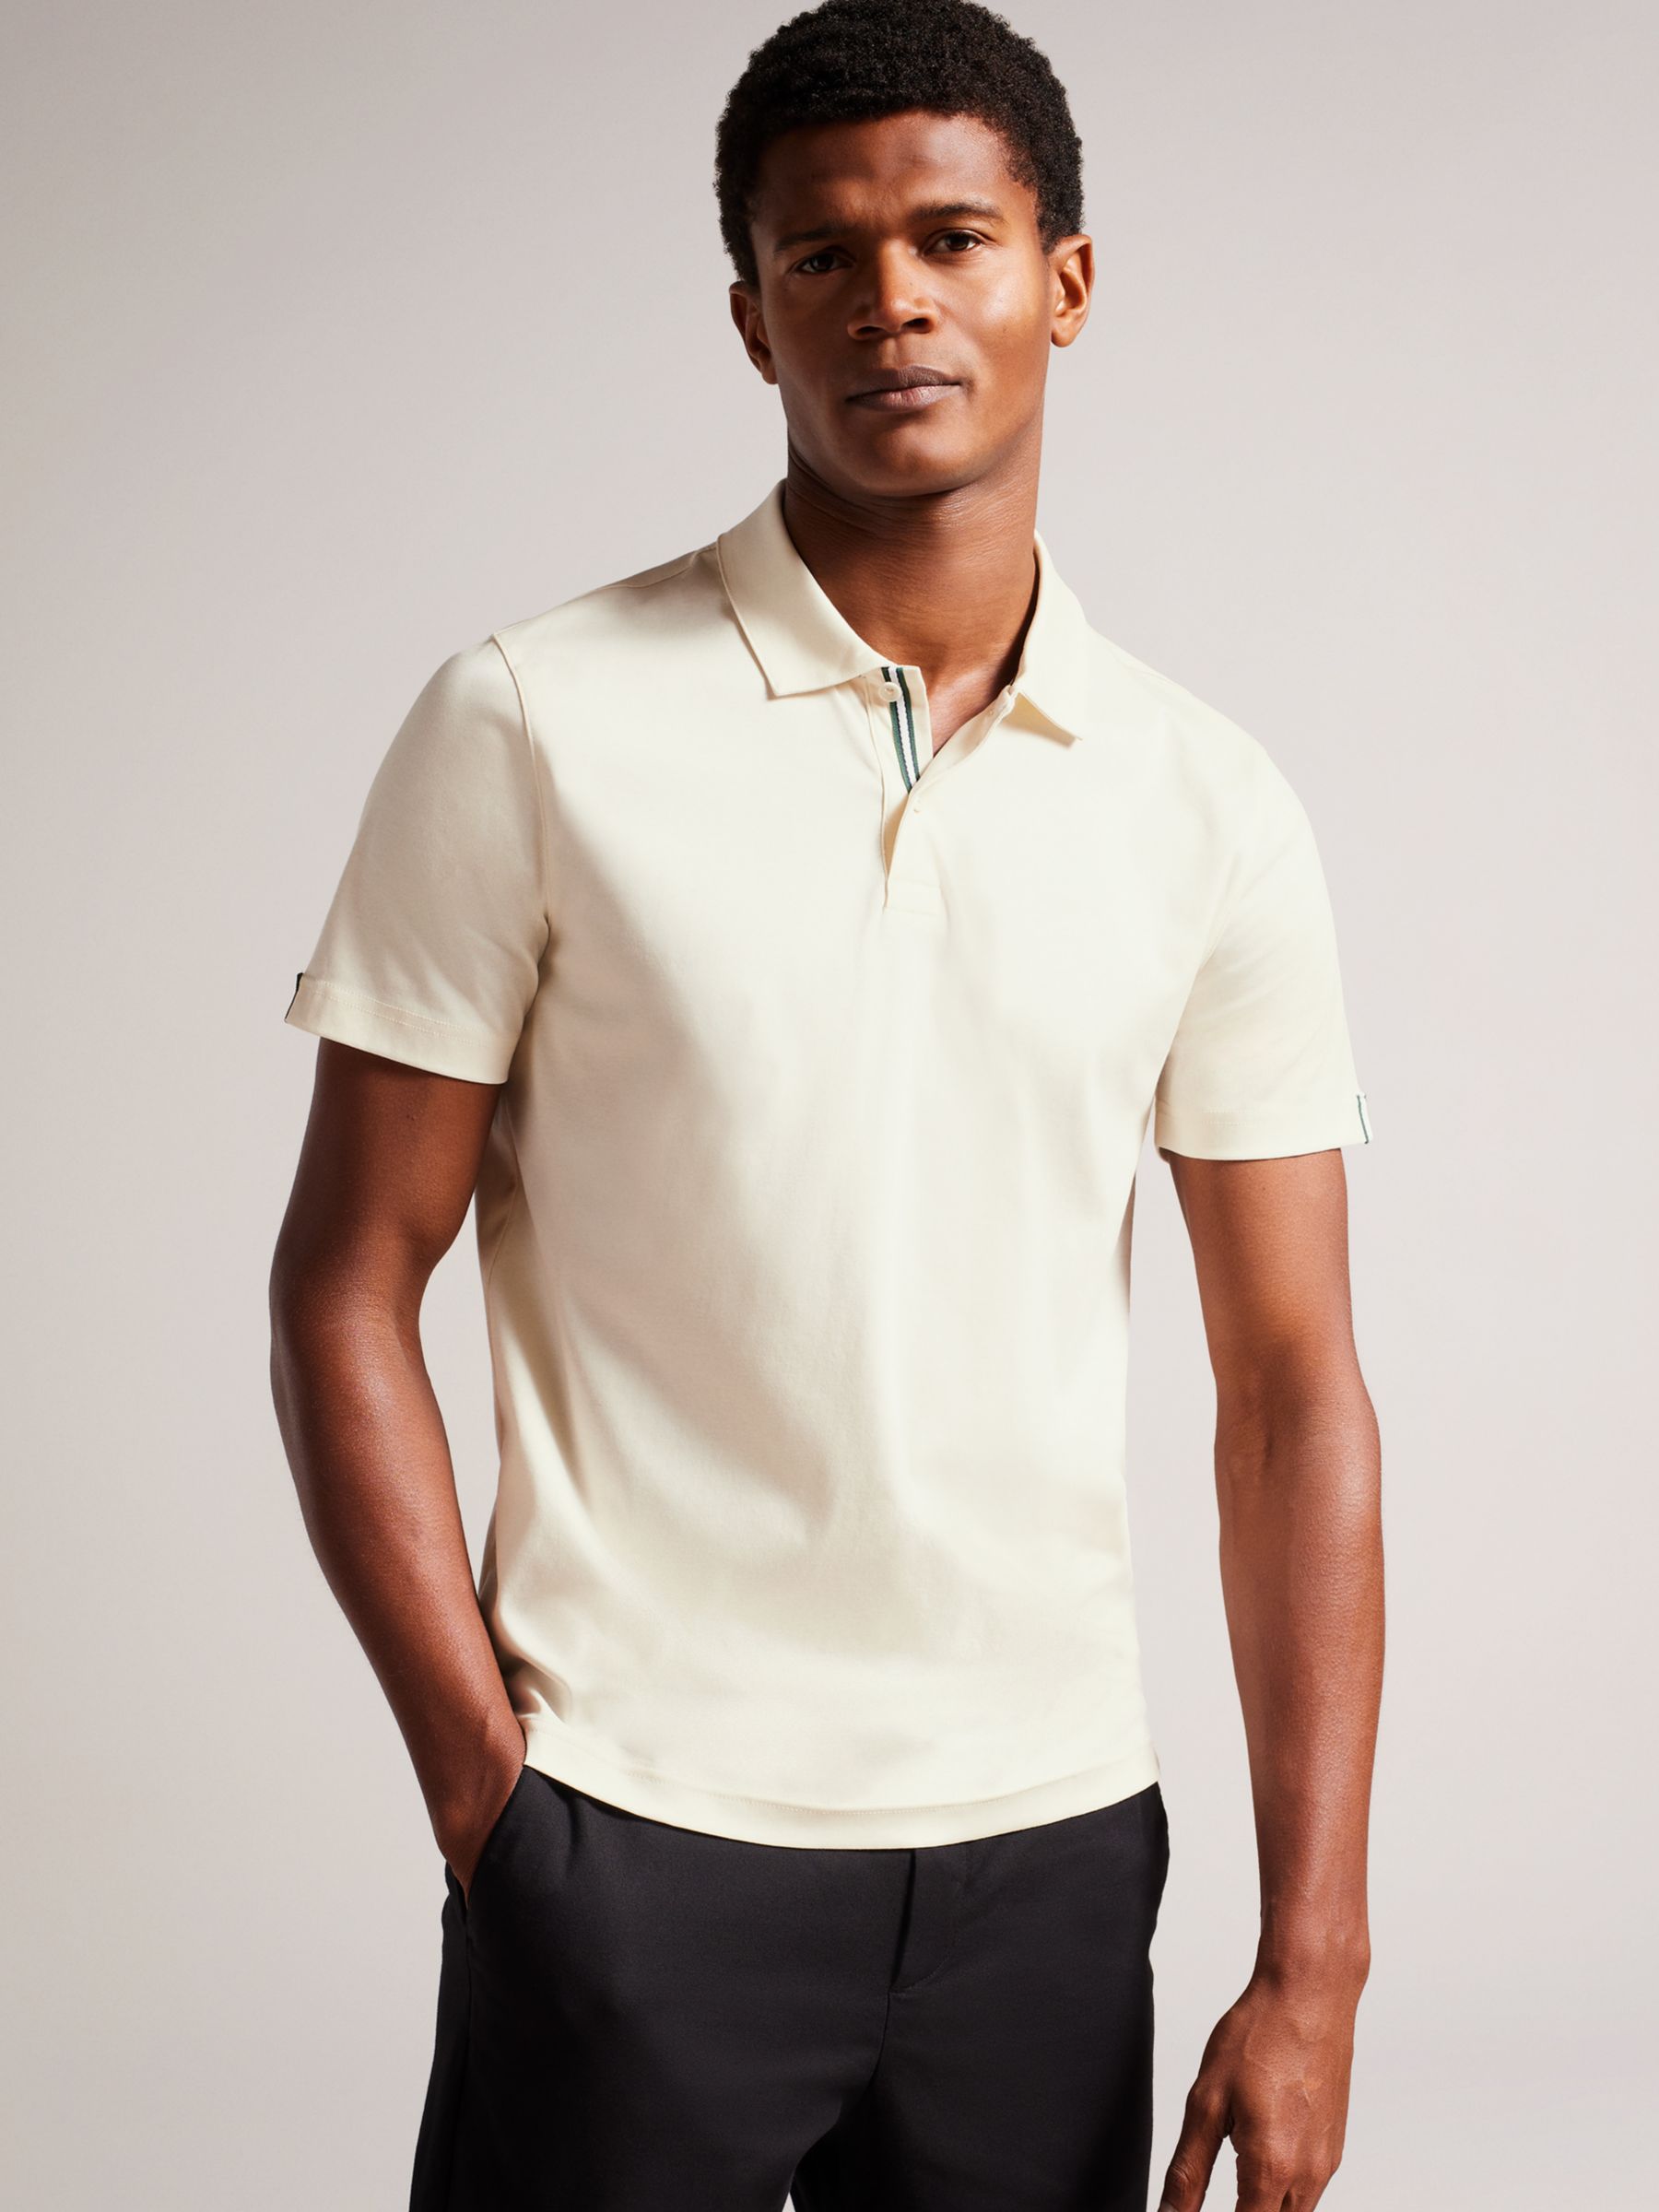 Ted Baker Short Sleeve Slim Soft Touch Polo Top, White, M